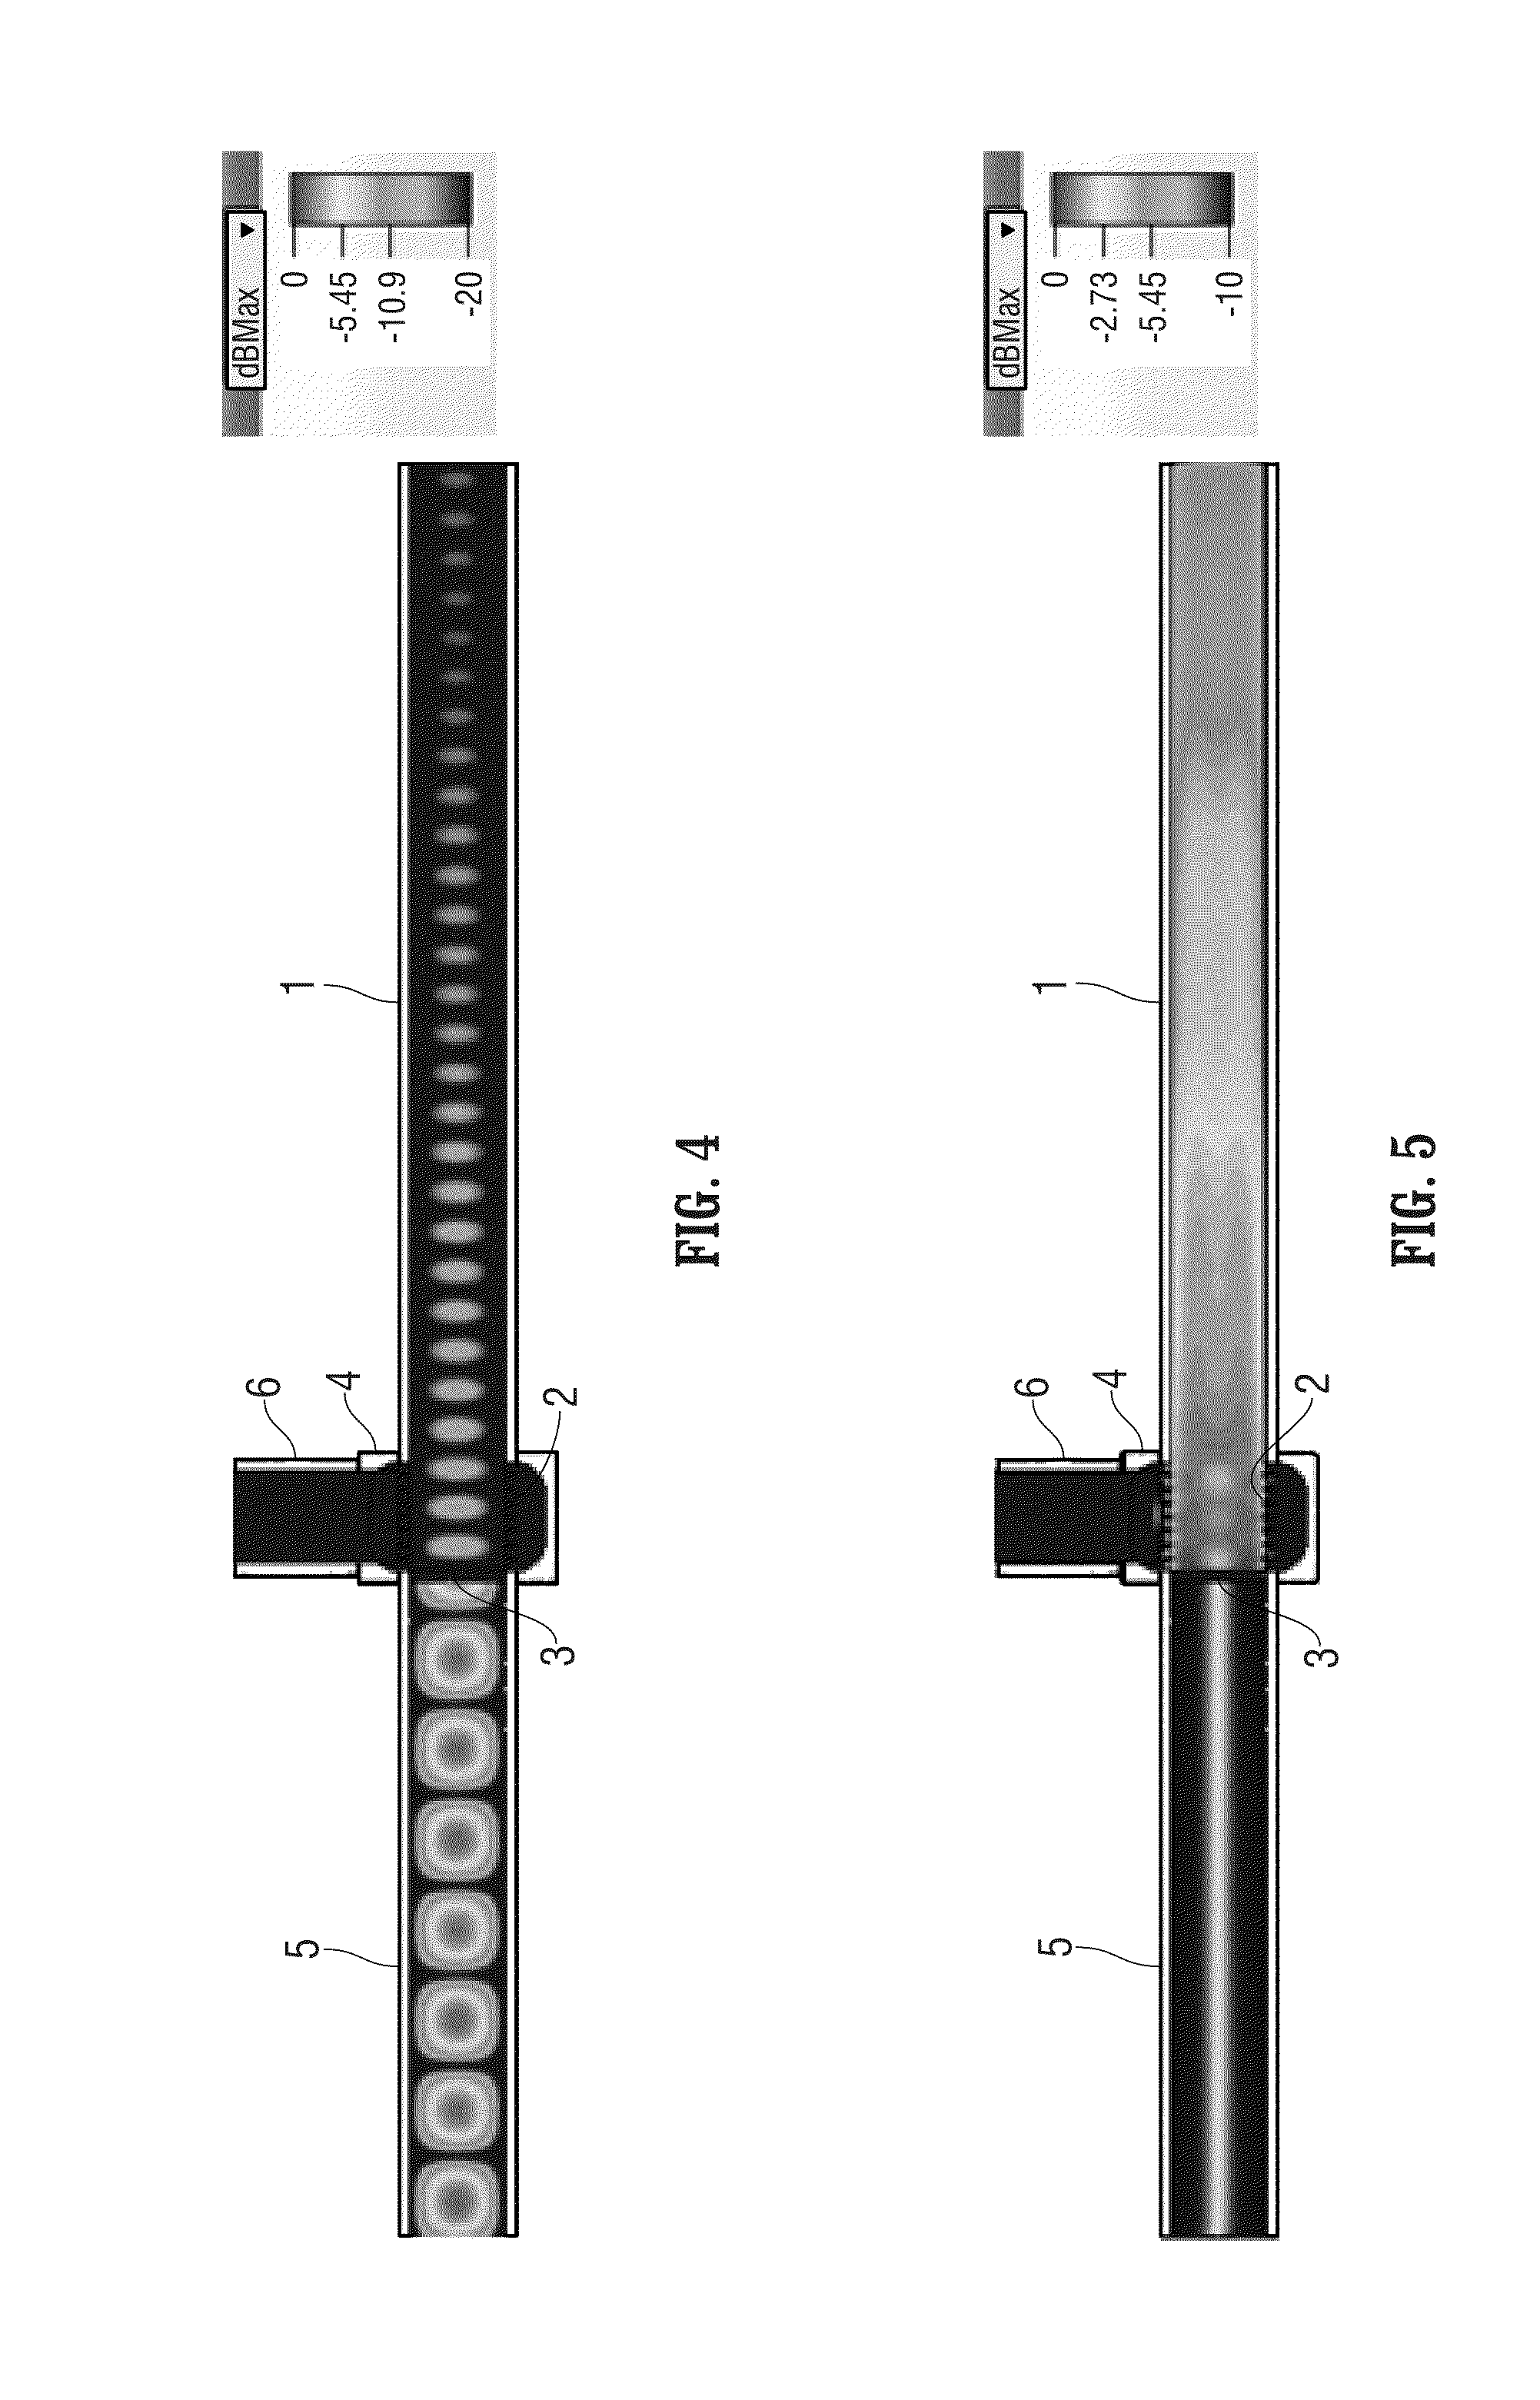 Apparatus and method employing microwave heating of hydrocarbon fluid